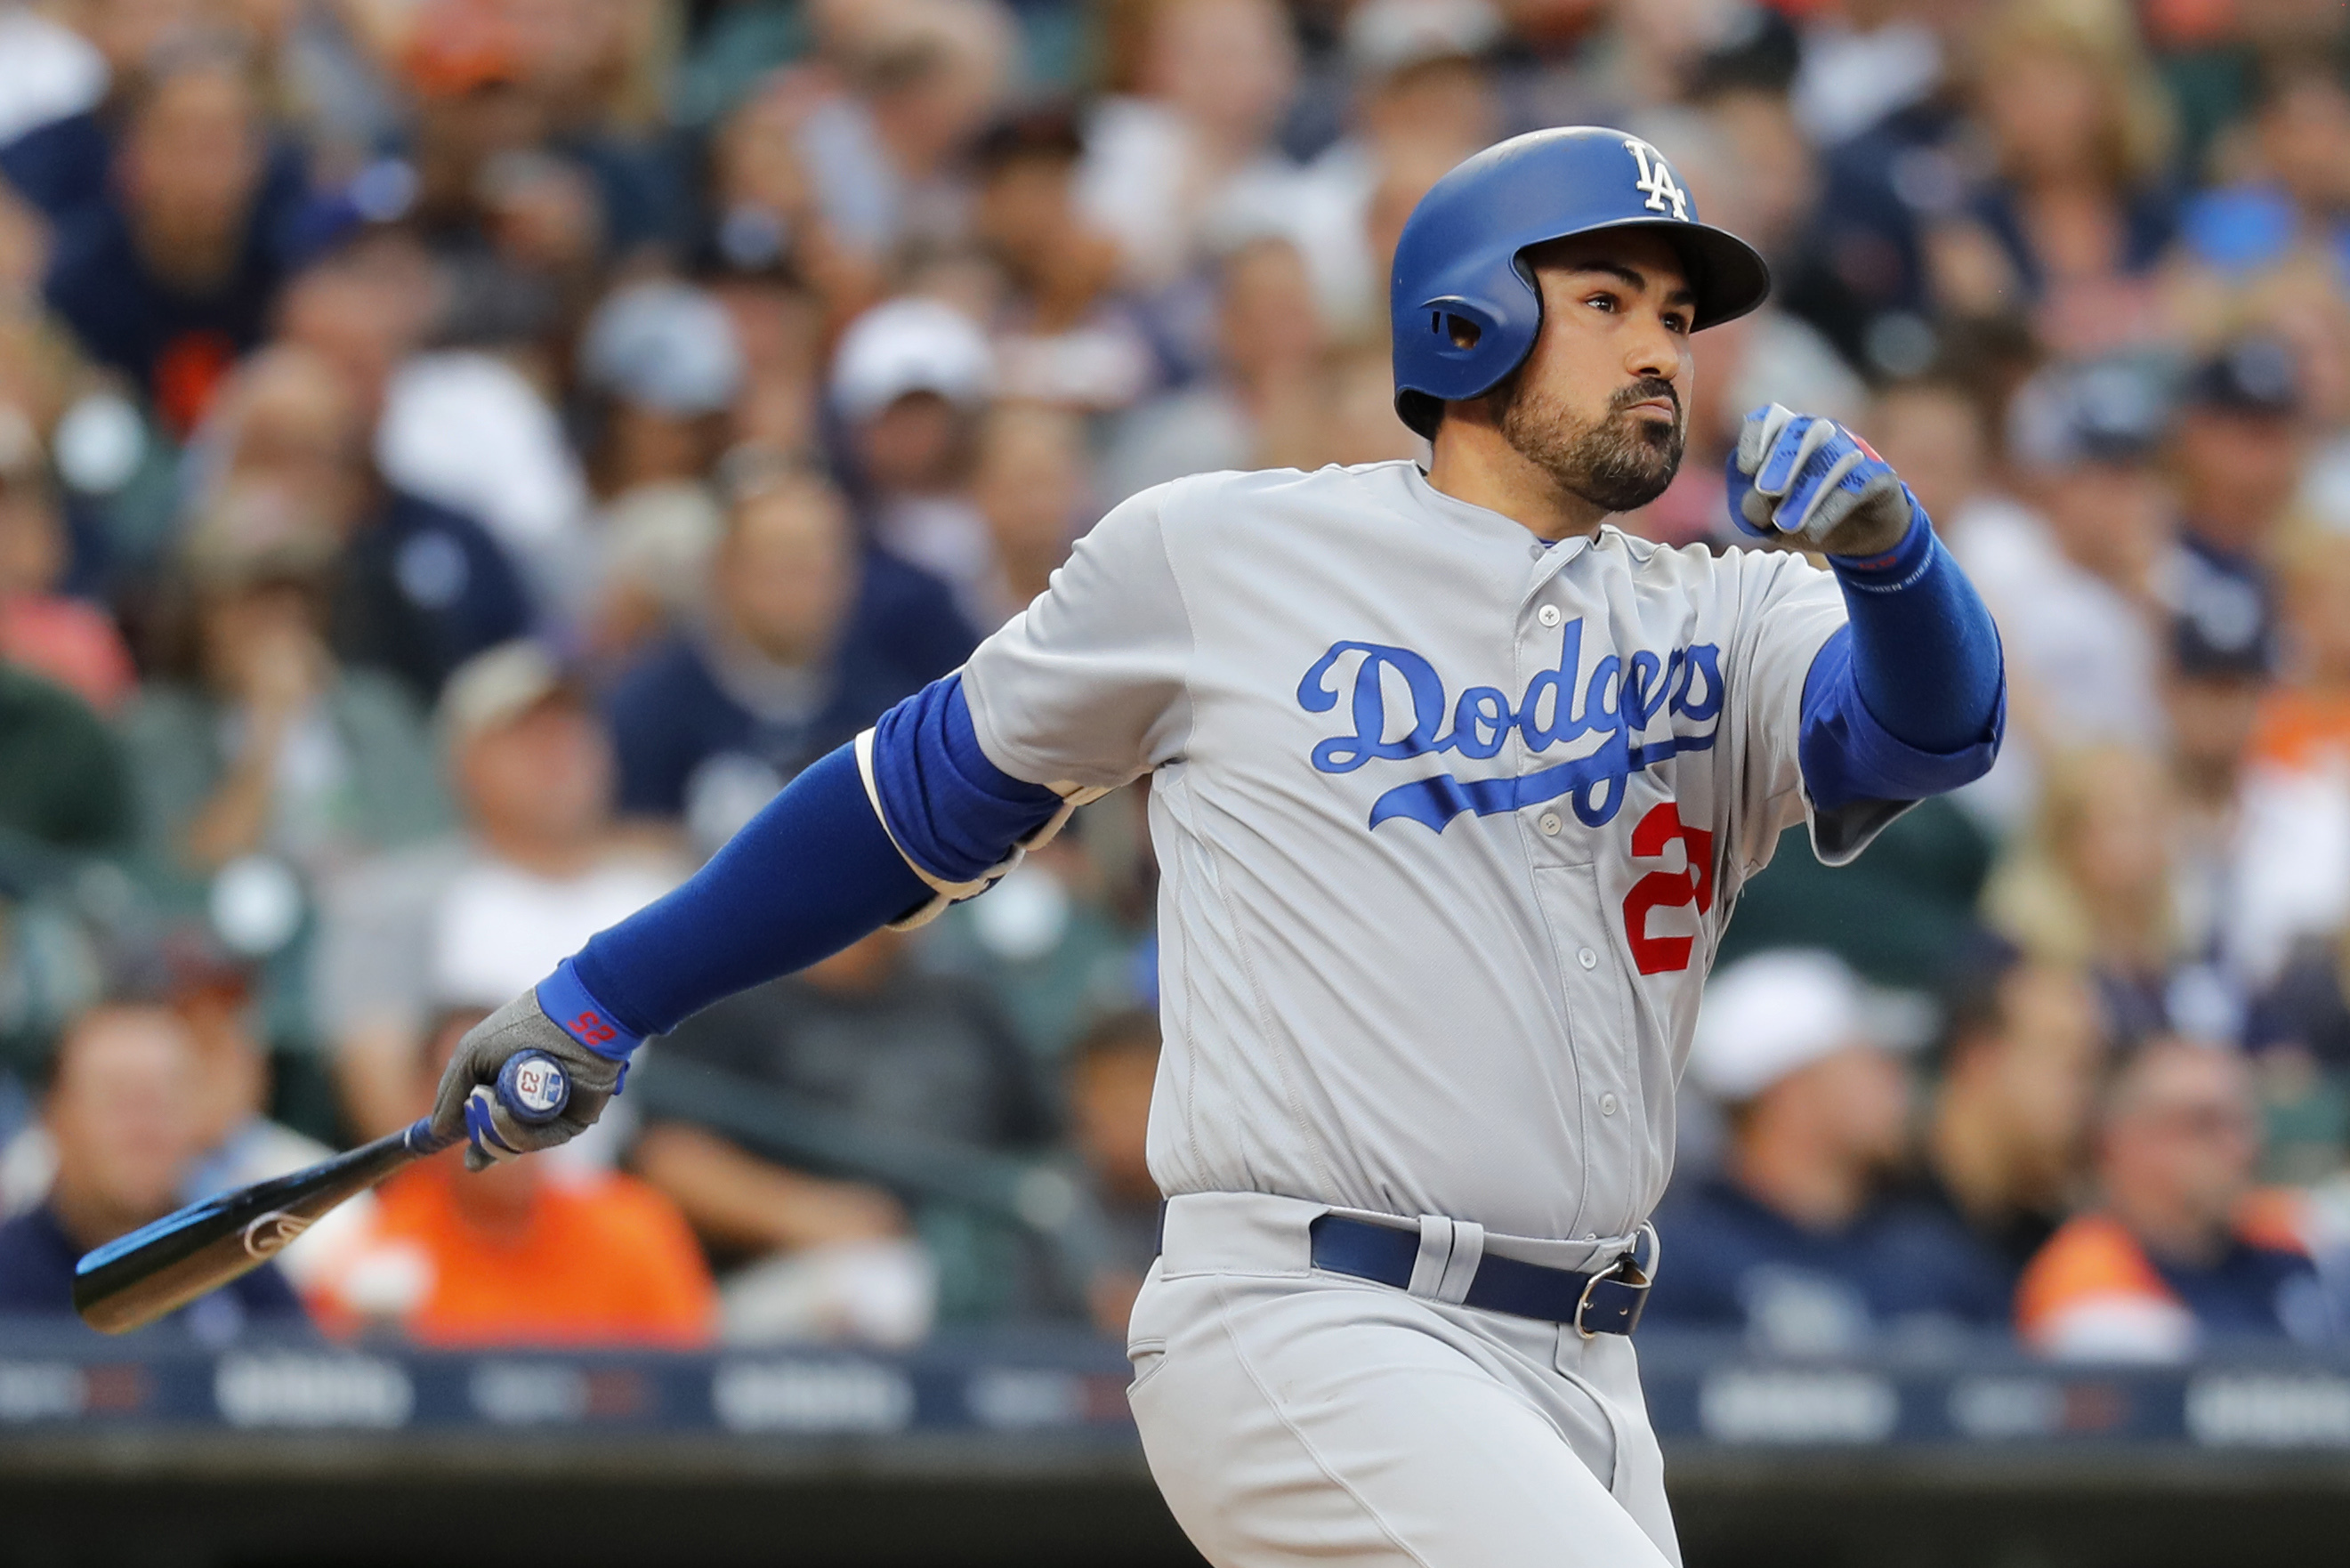 Adrian Gonzalez still has something to offer to the New York Mets